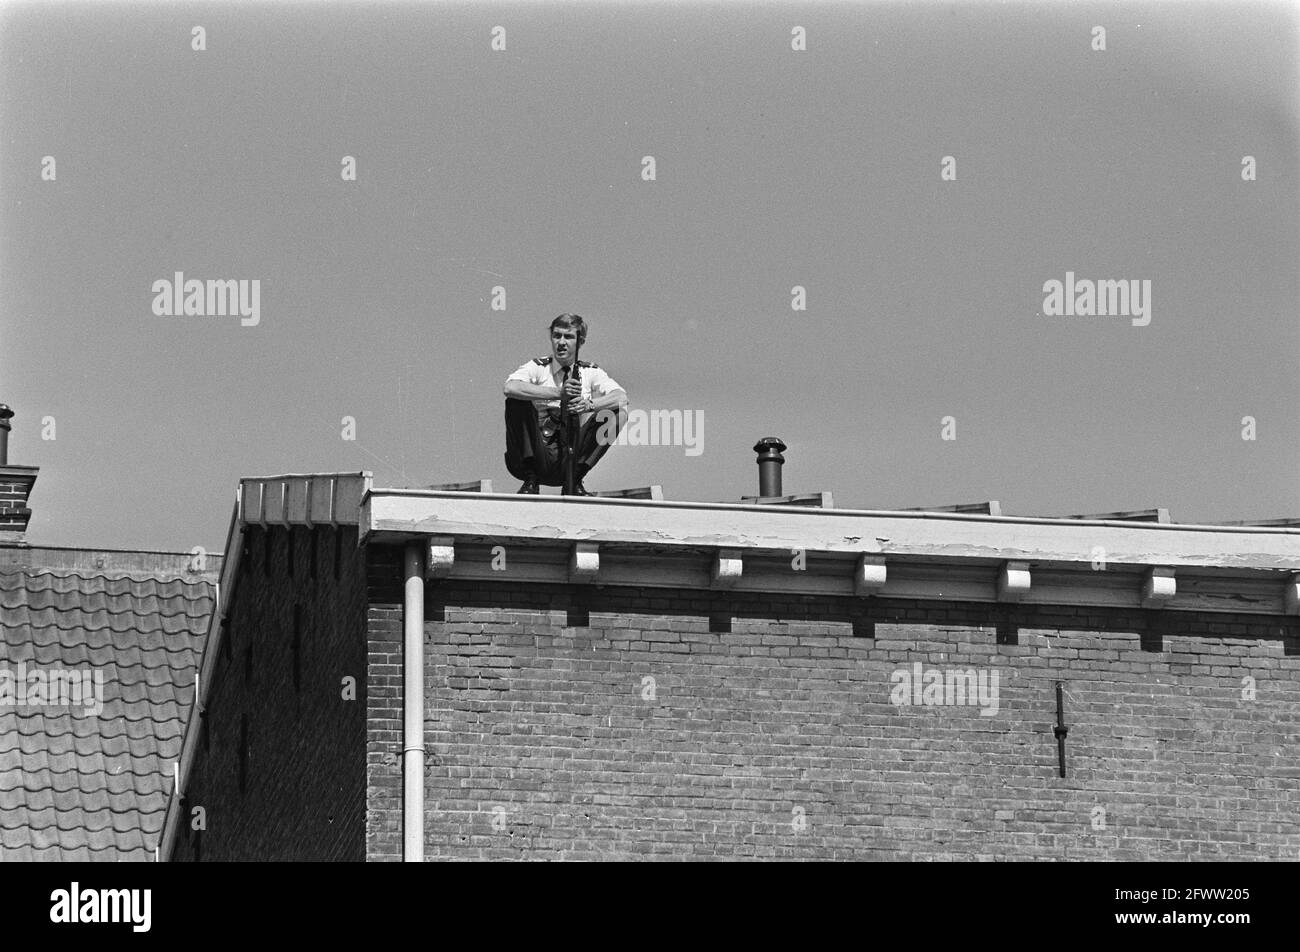 Trial of Palestinian airplane hijackers started in Haarlem sniper on roof, May 30, 1974, roofs, trials, snipers, airplane hijackers, The Netherlands, 20th century press agency photo, news to remember, documentary, historic photography 1945-1990, visual stories, human history of the Twentieth Century, capturing moments in time Stock Photo